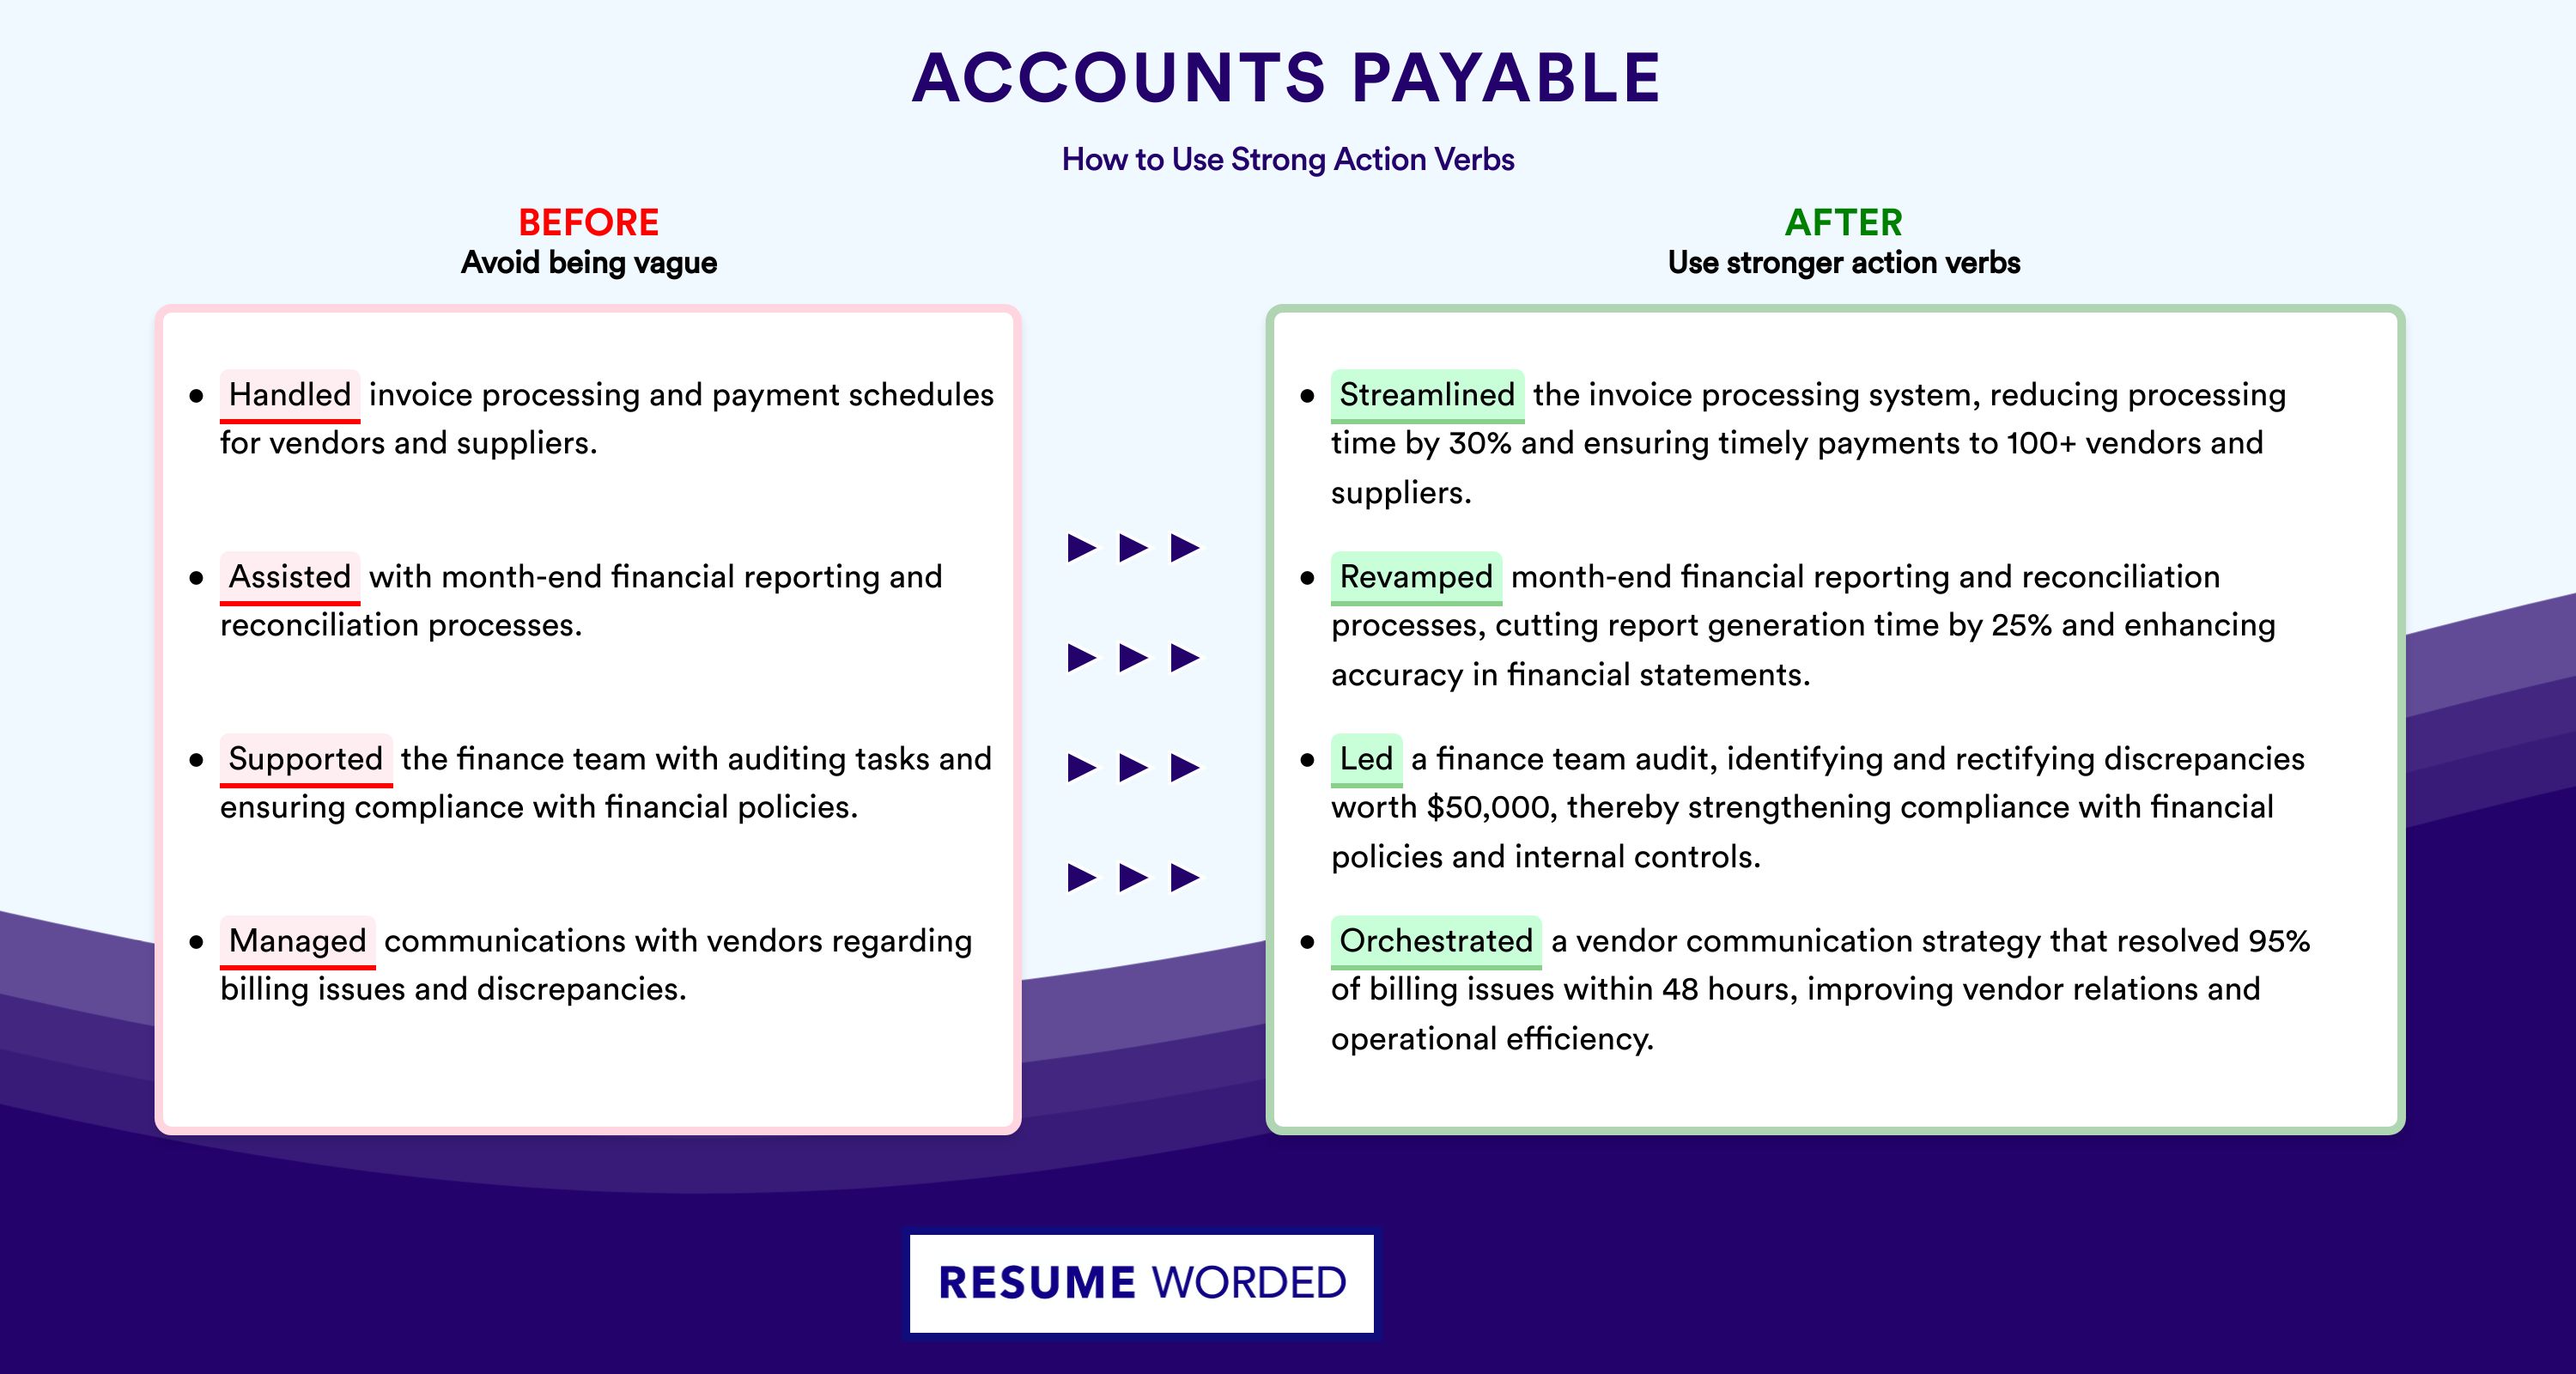 Action Verbs for Accounts Payable